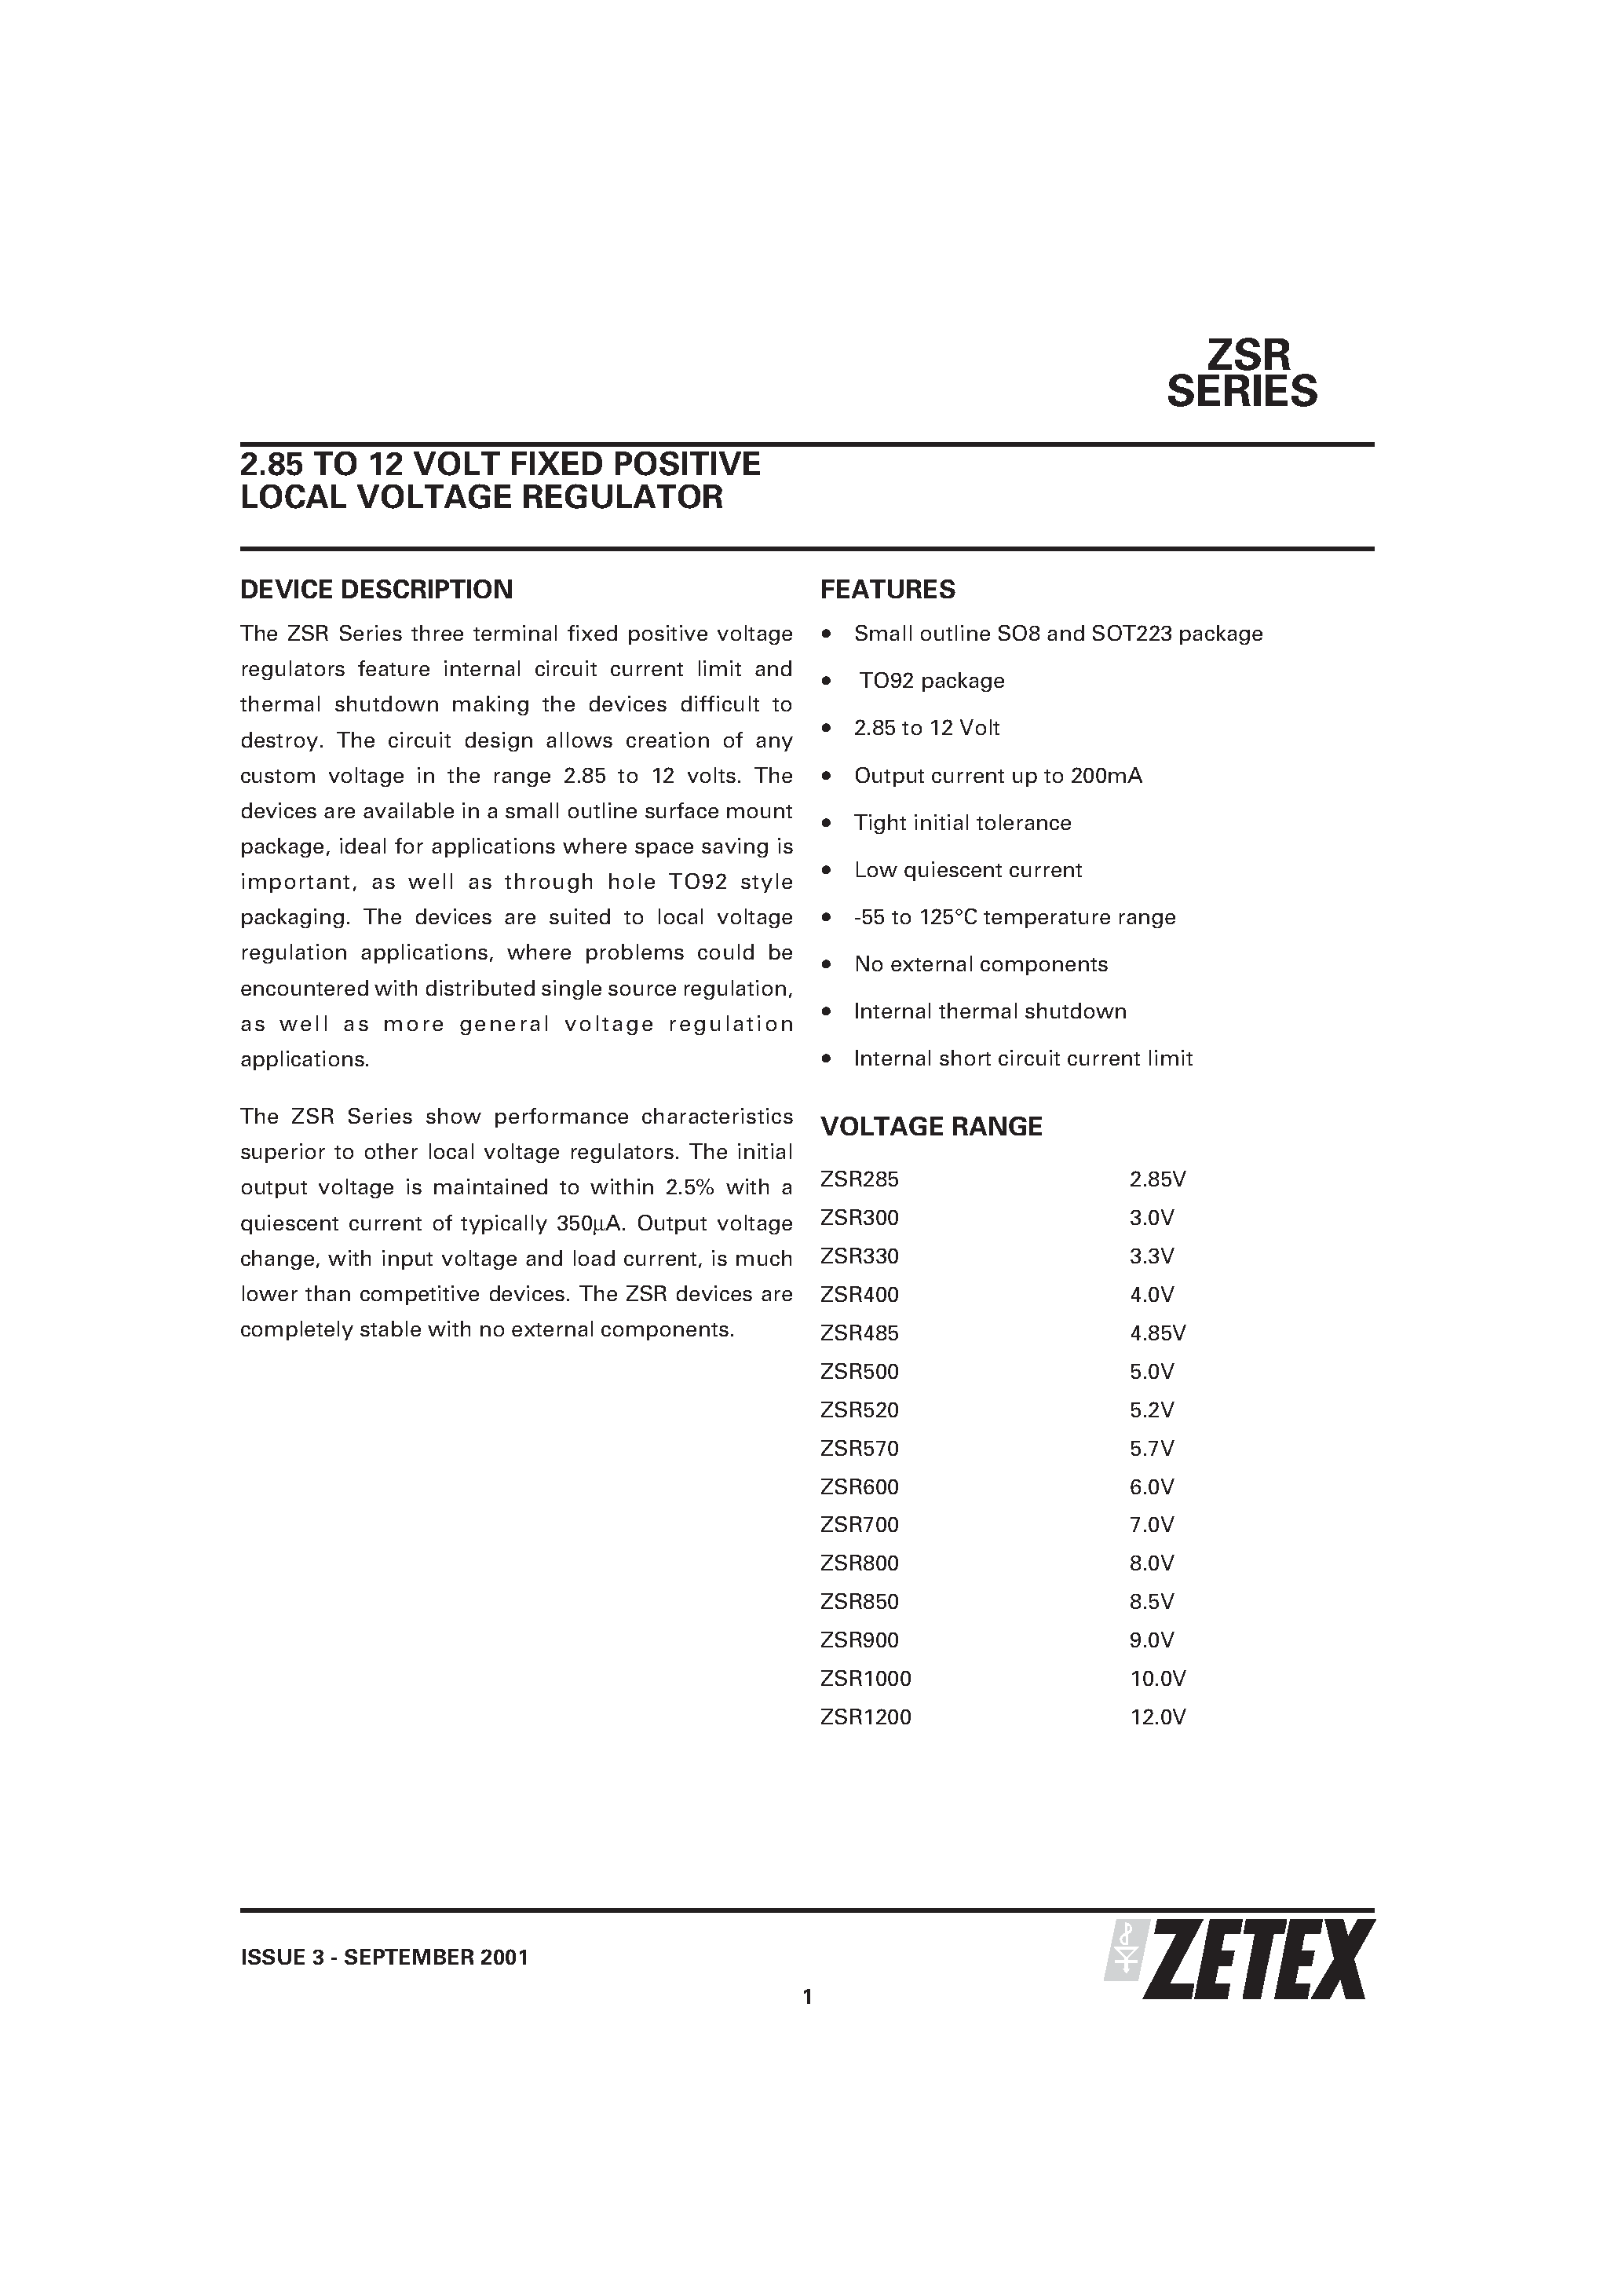 Datasheet ZSR520G - 2.85 TO 12 VOLT FIXED POSITIVE LOCAL VOLTAGE REGULATOR page 1